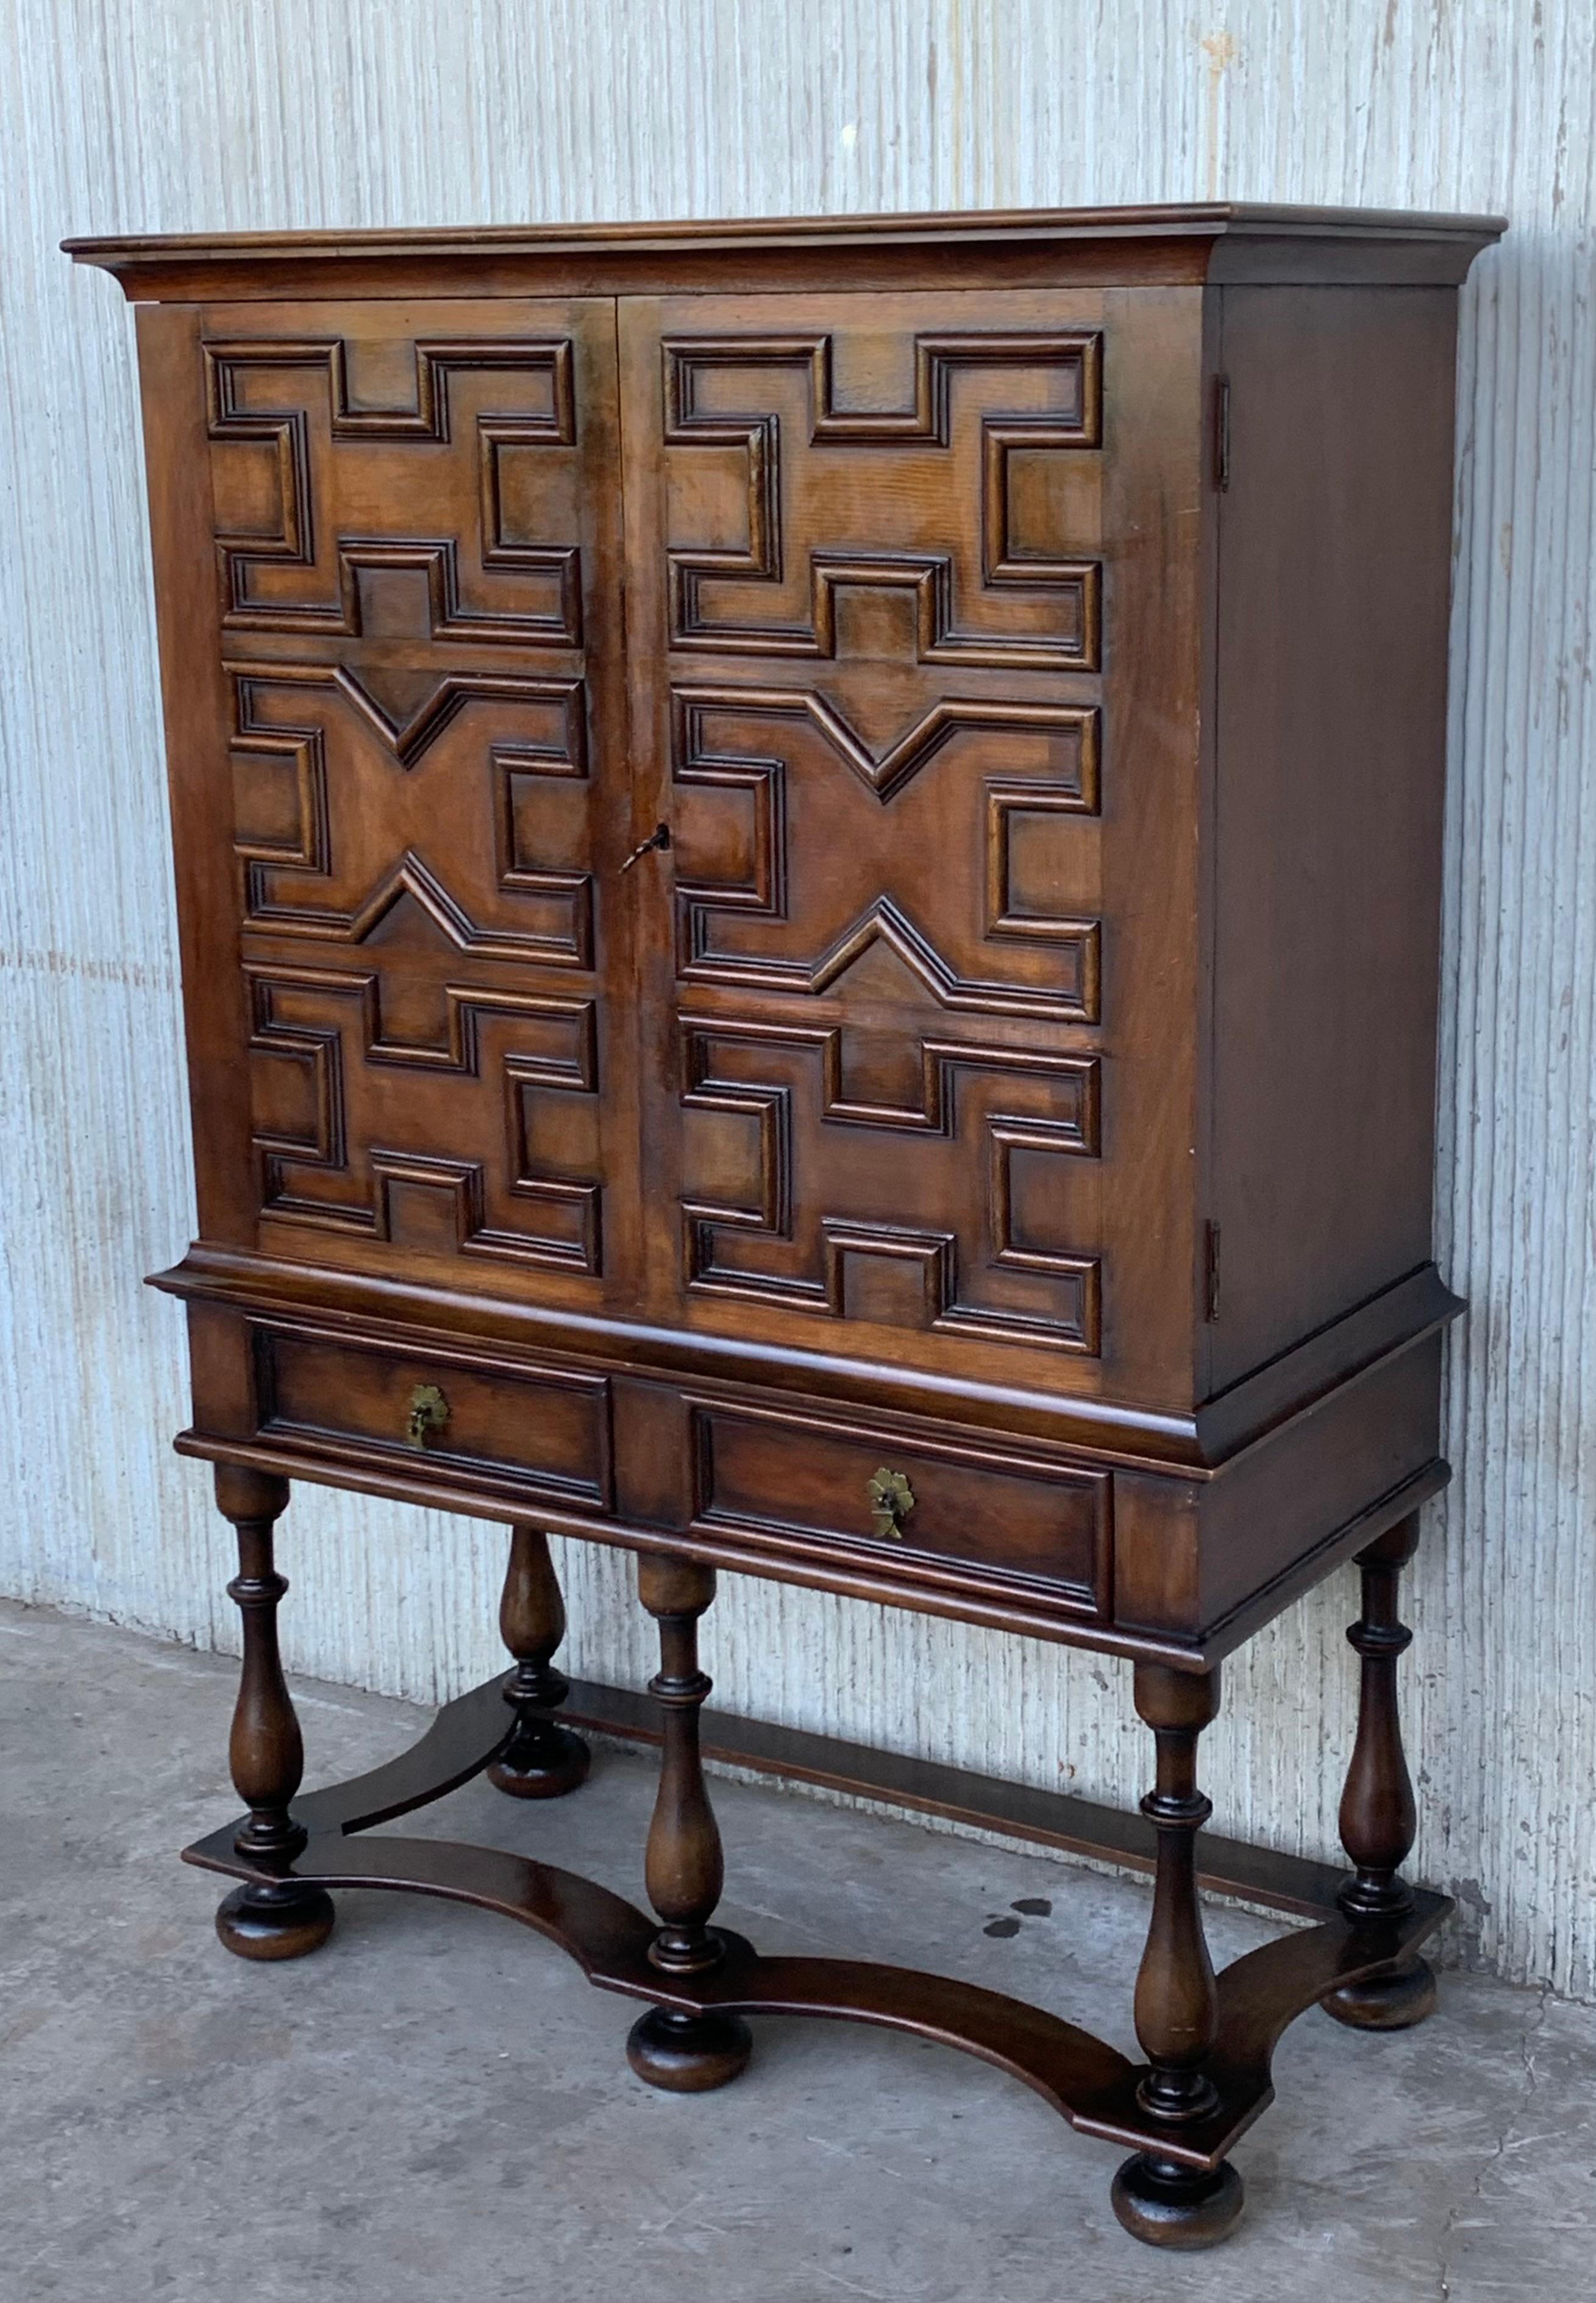 Baroque 19th Catalan Spanish Cabinet on Stand in Carved Walnut and Iron Stretcher